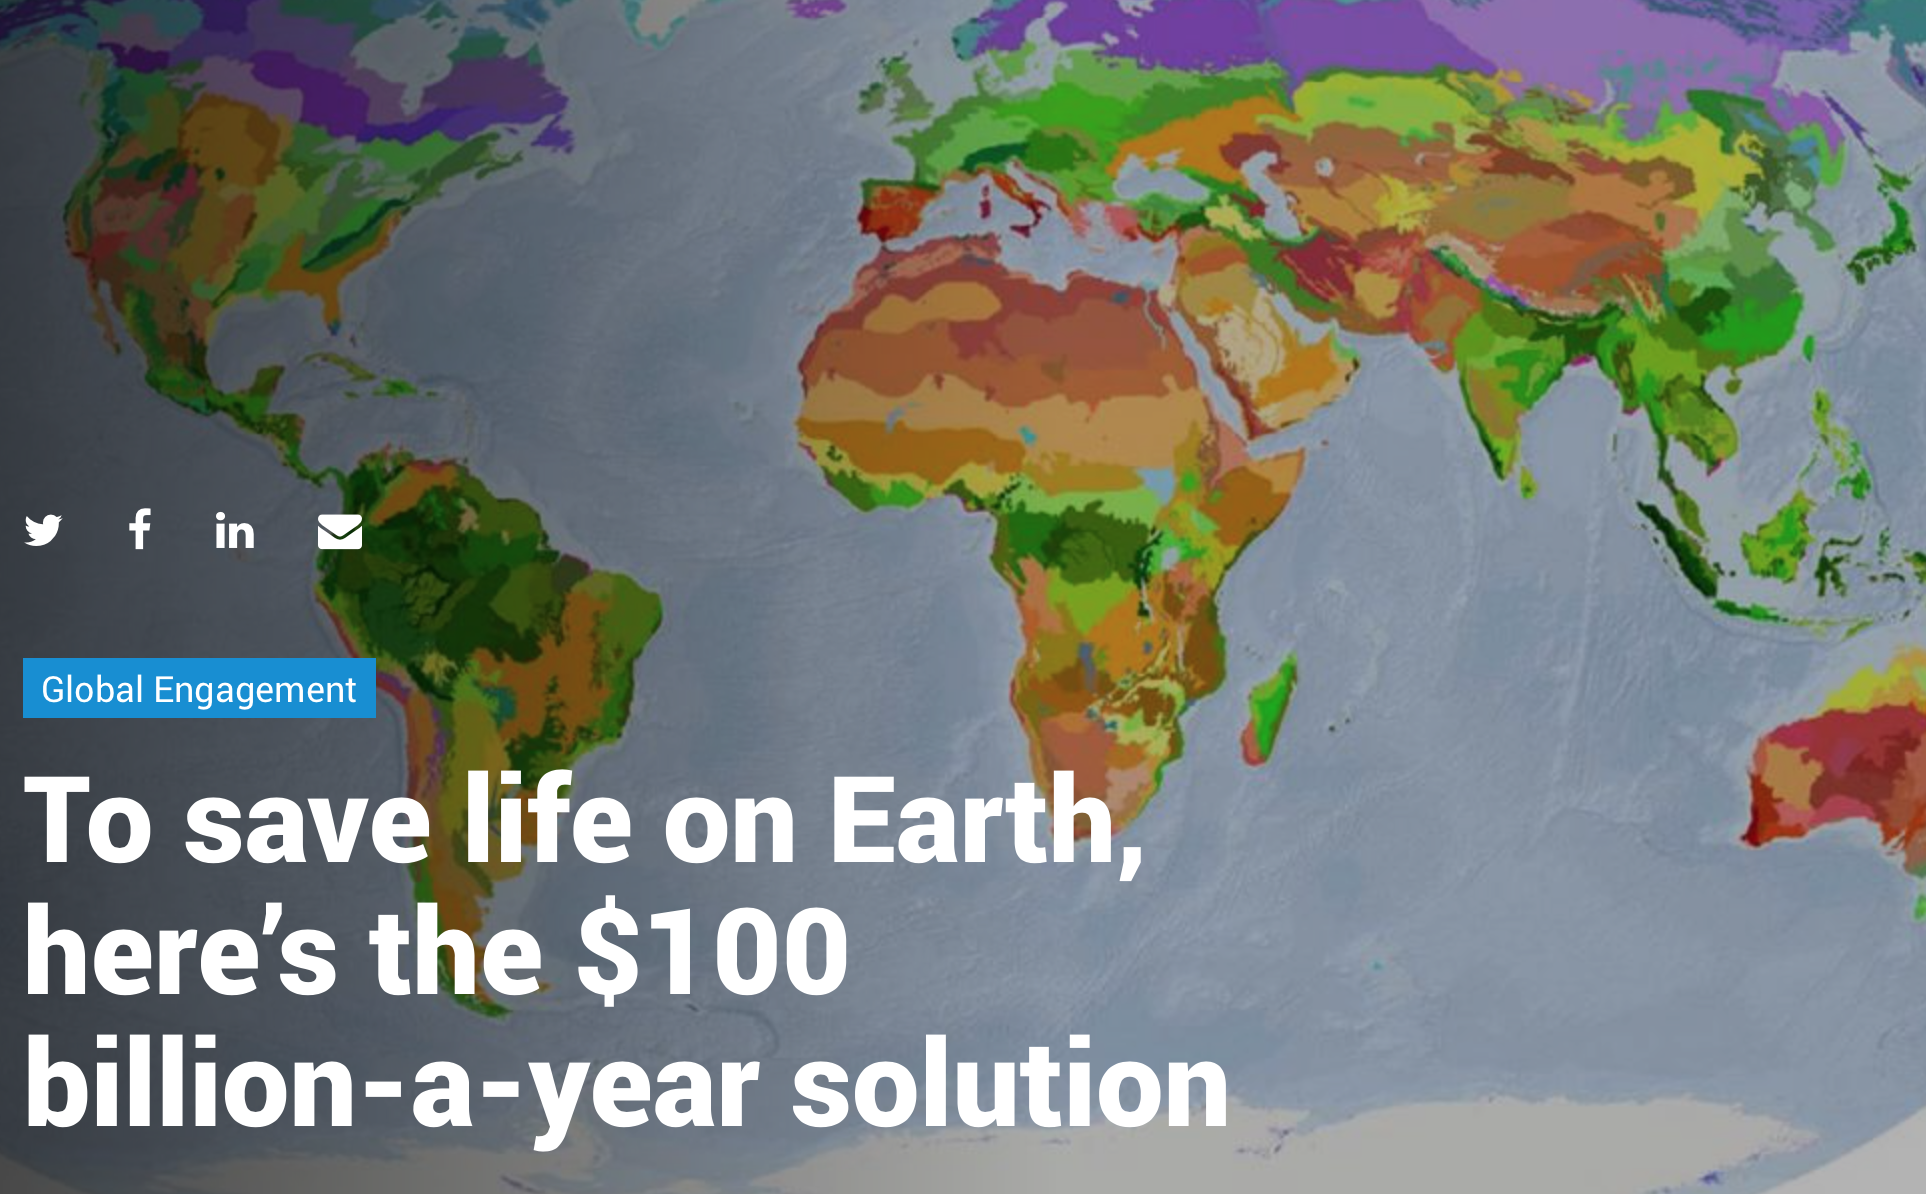 To save life on Earth, here’s the $100 billion-a-year solution